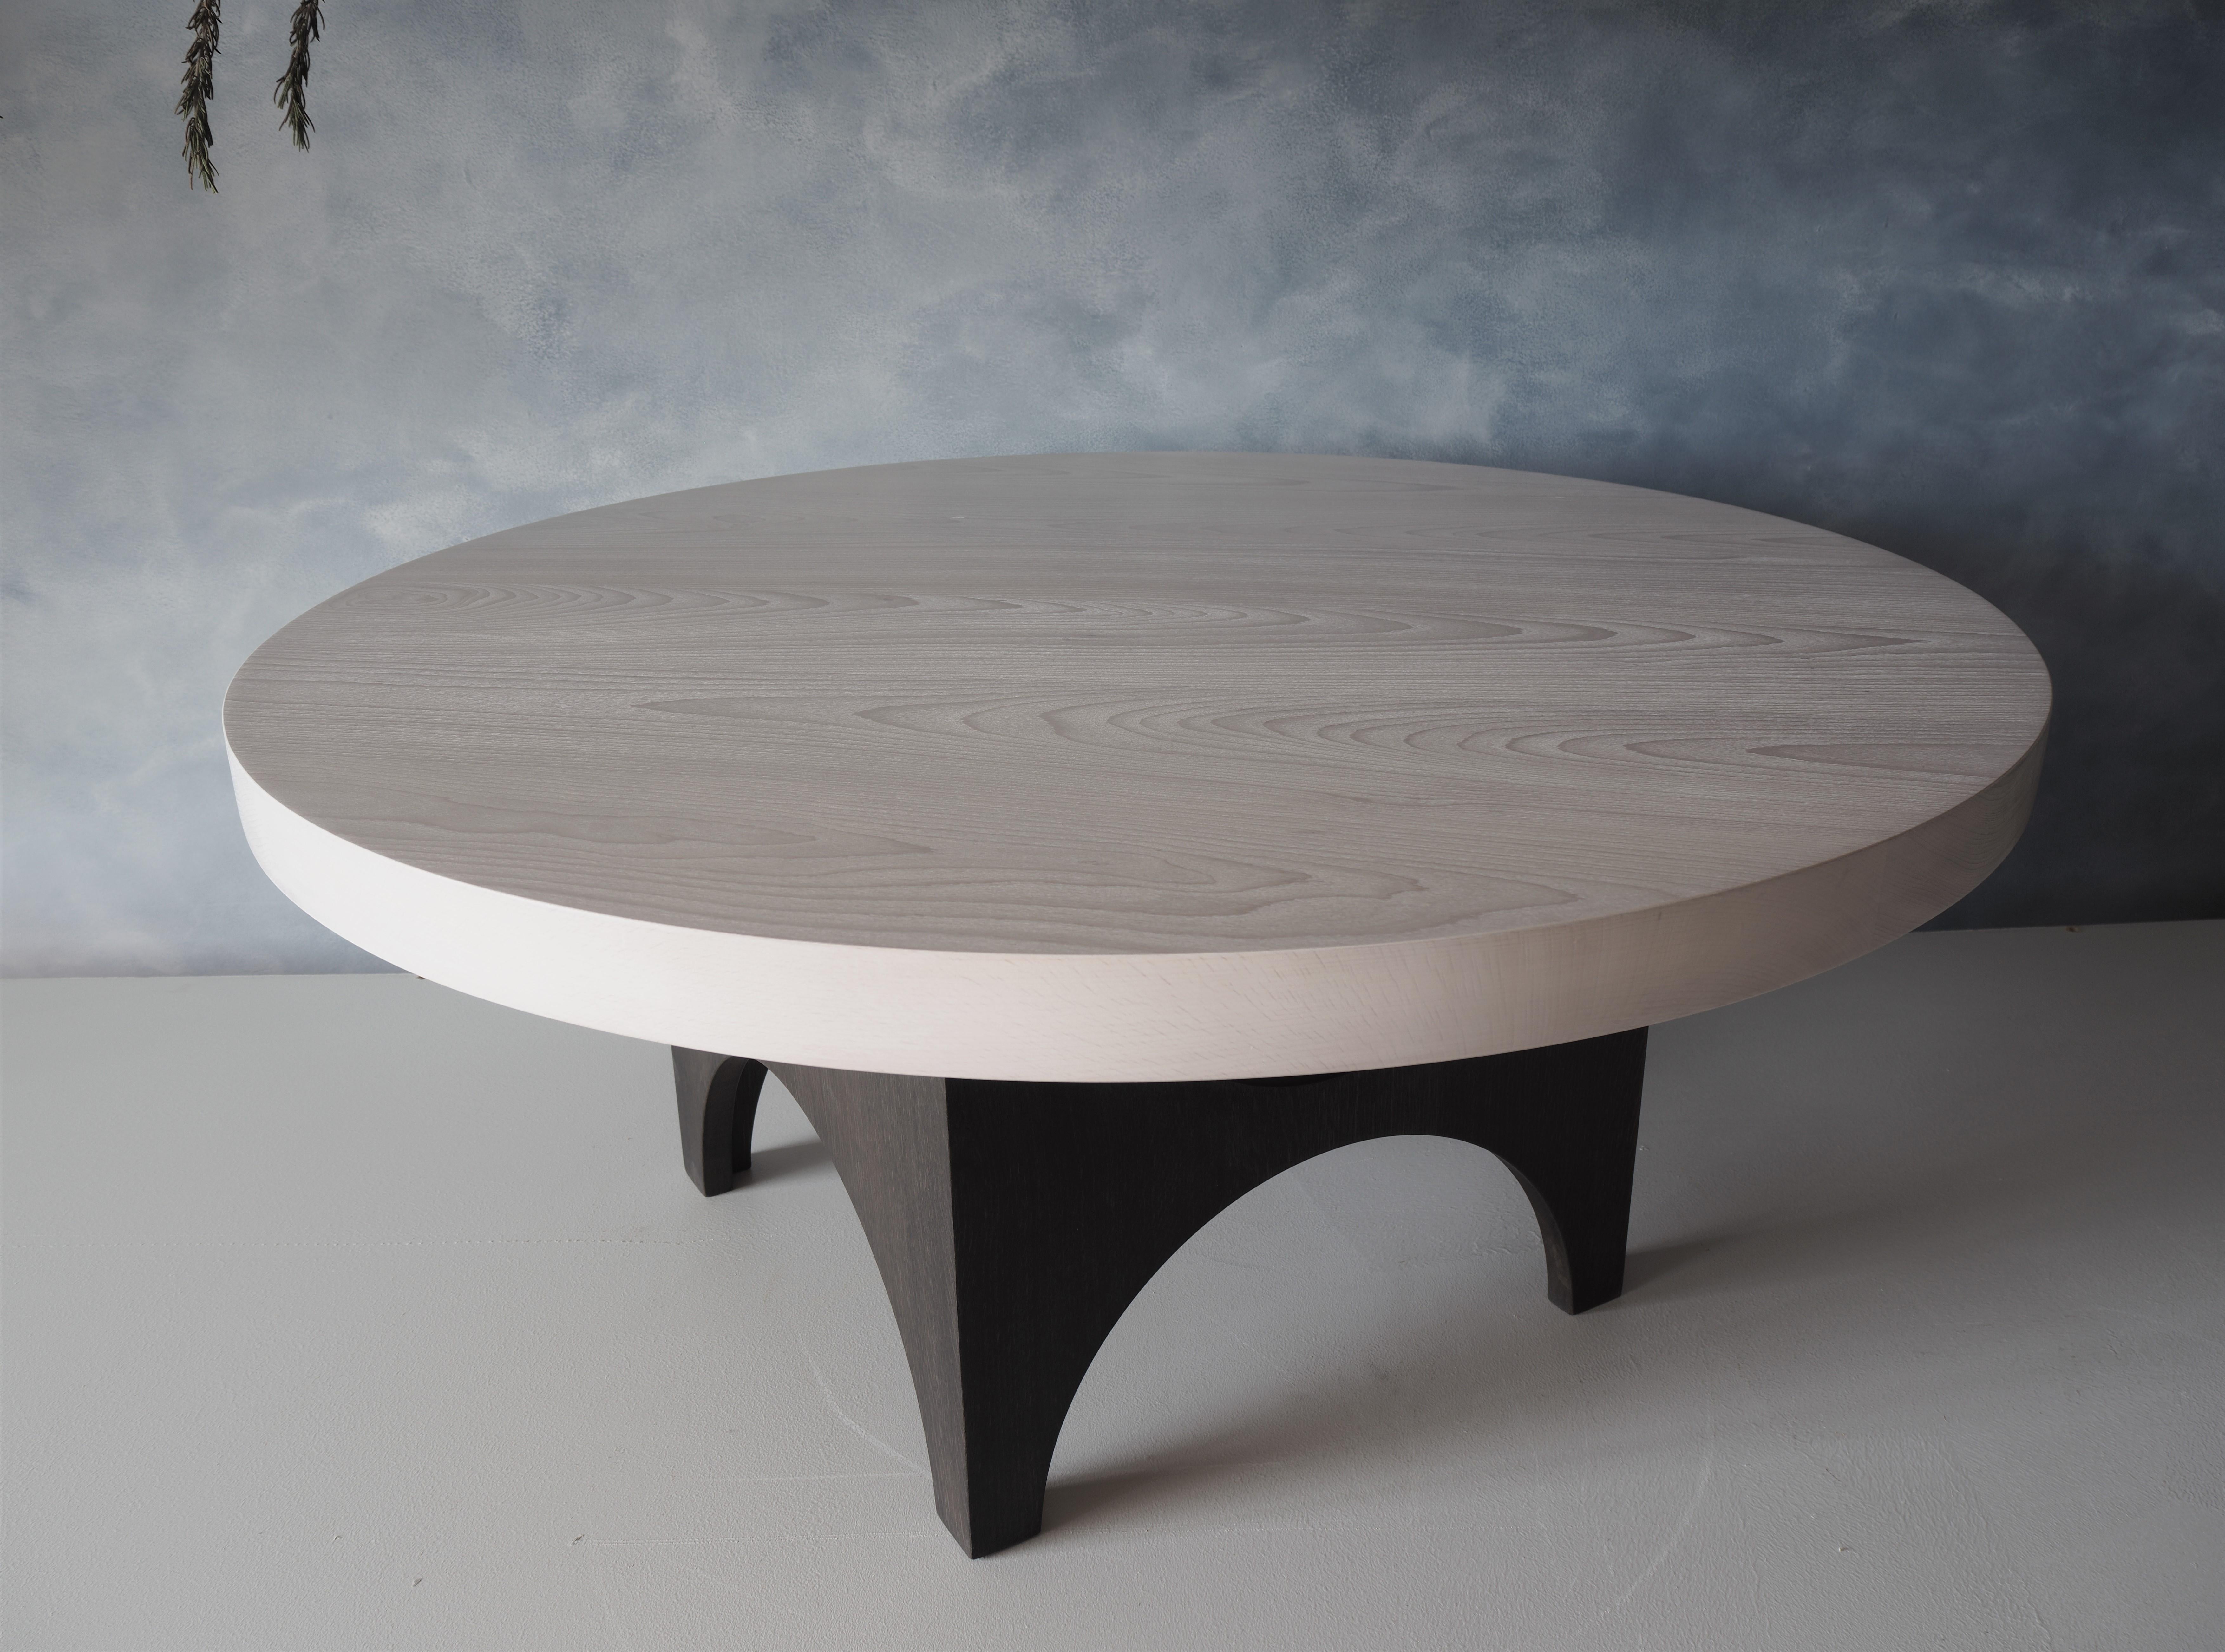 Canadian White Washed Beech Coffee Table, India Ink Oak Base, Round, MSJ Furniture Studio